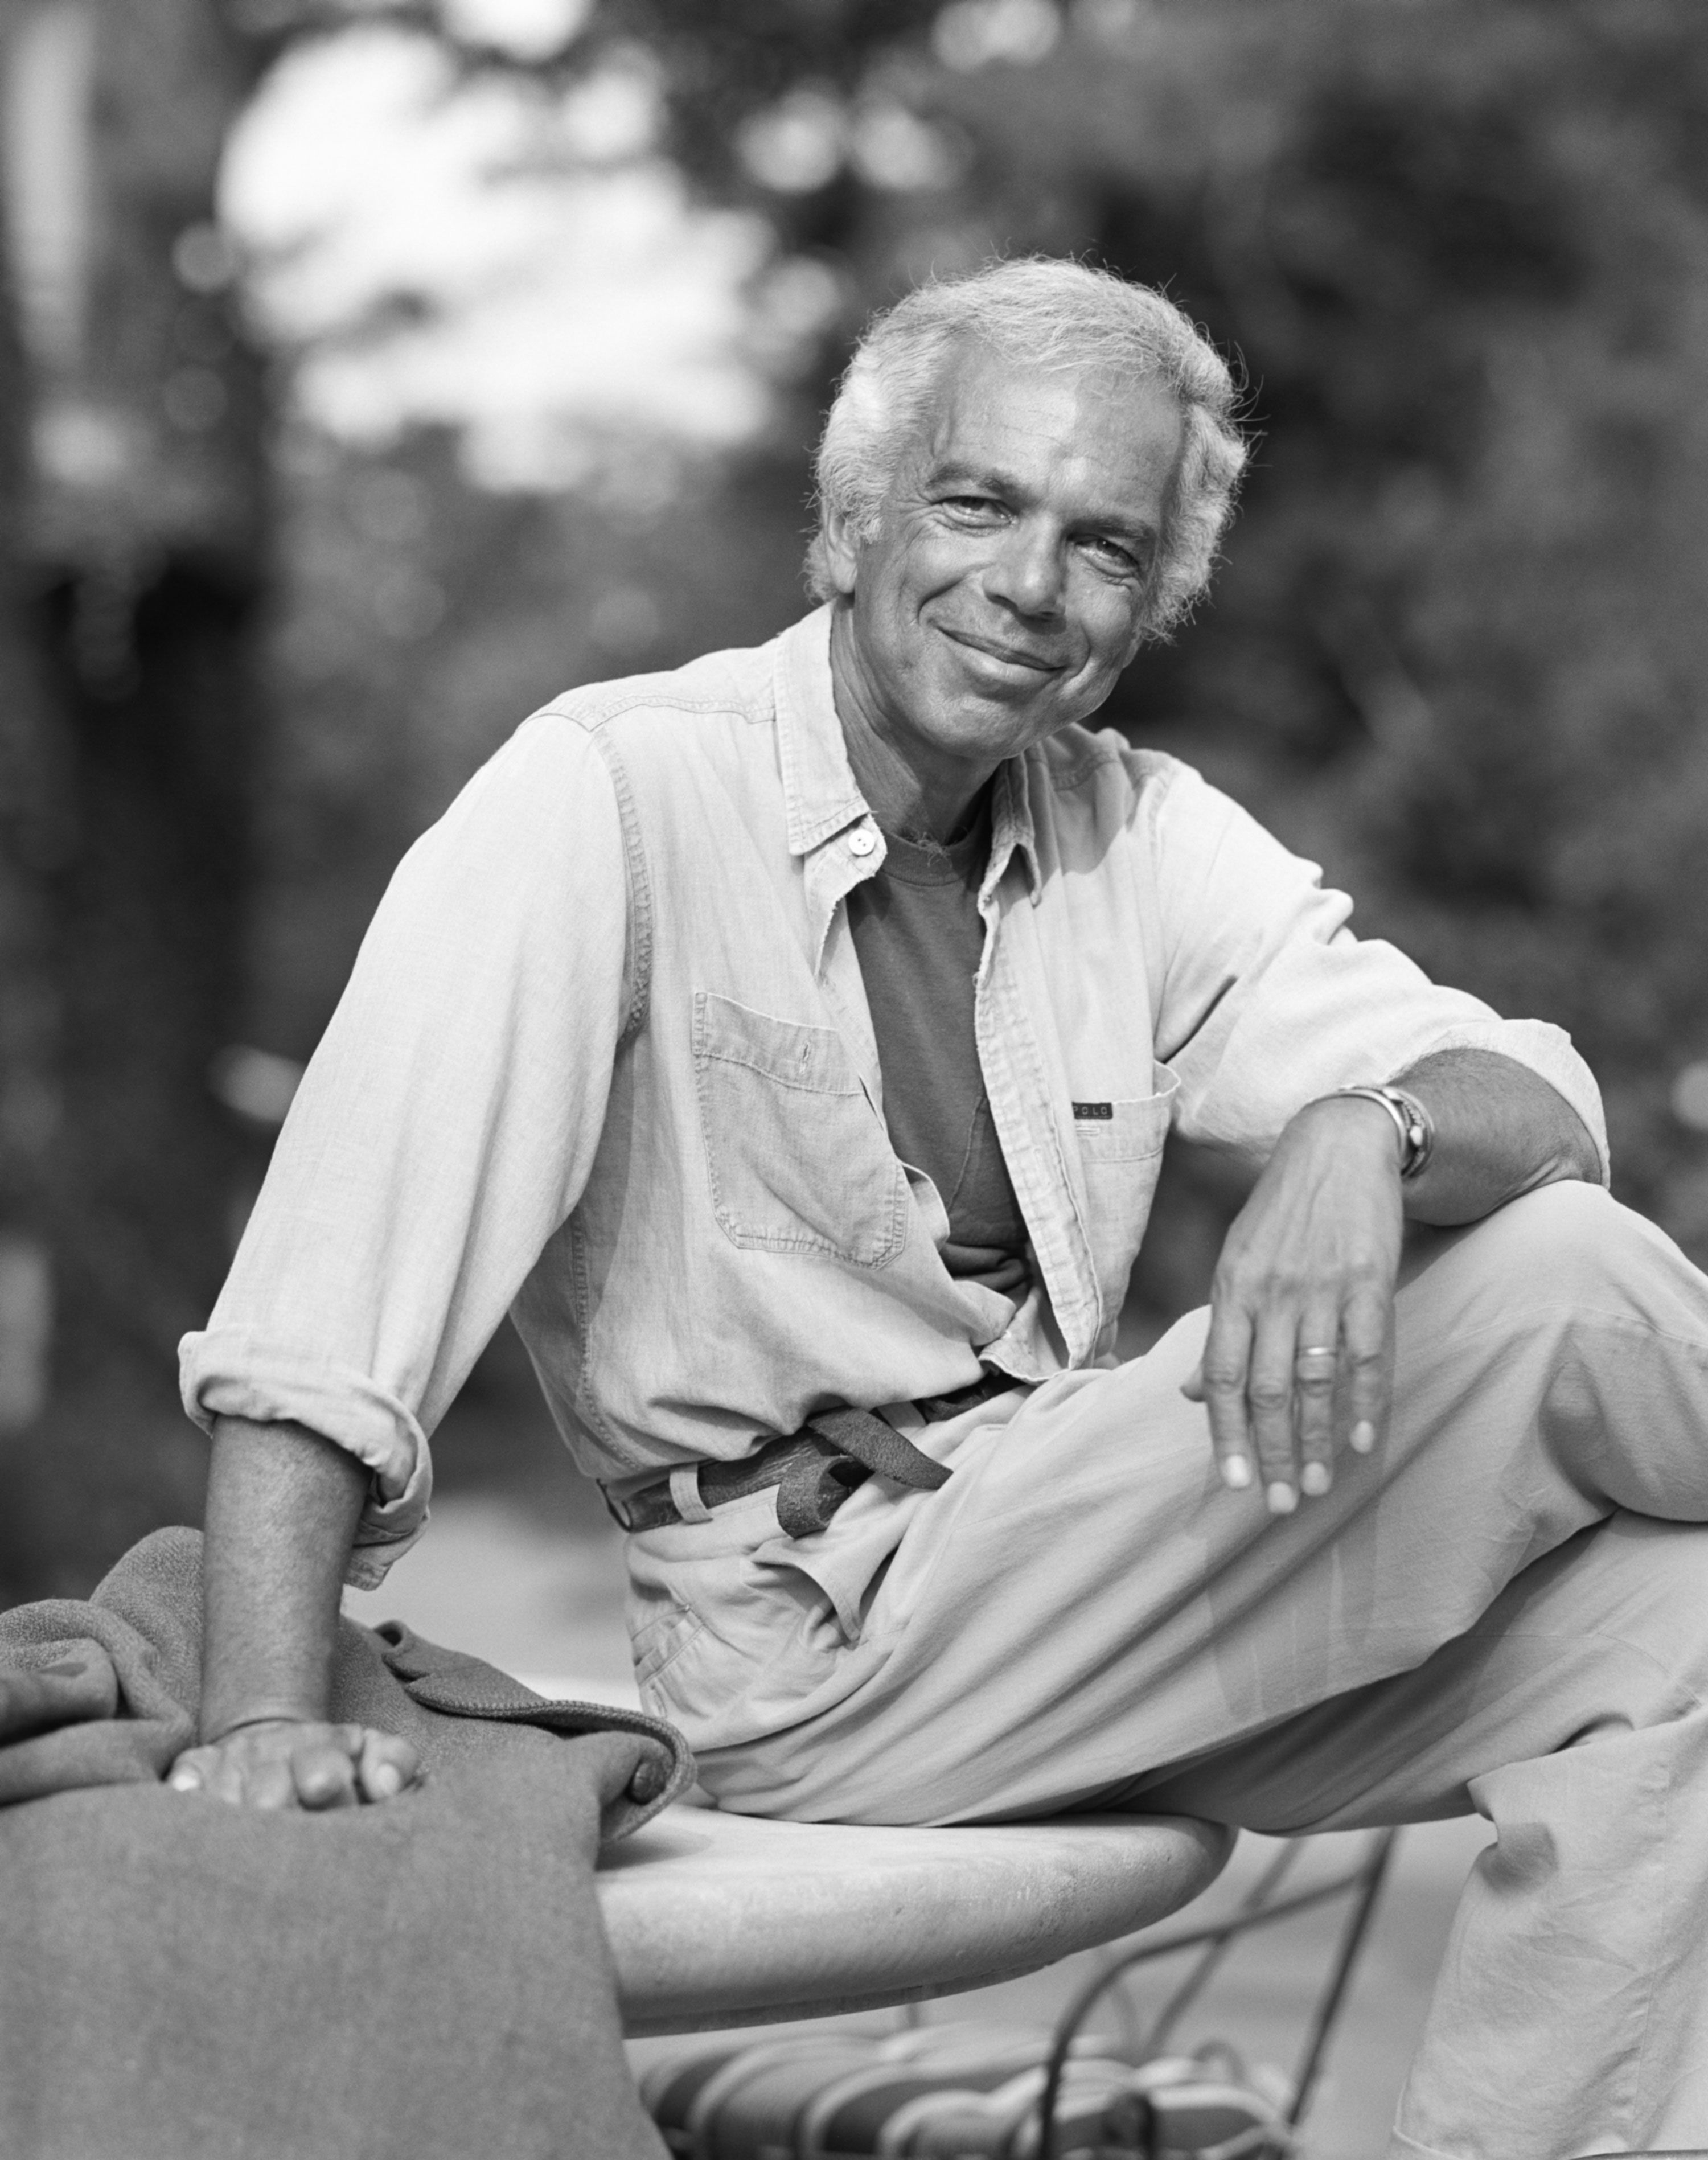 Ralph Lauren: The immigrants' son who built a global fashion empire